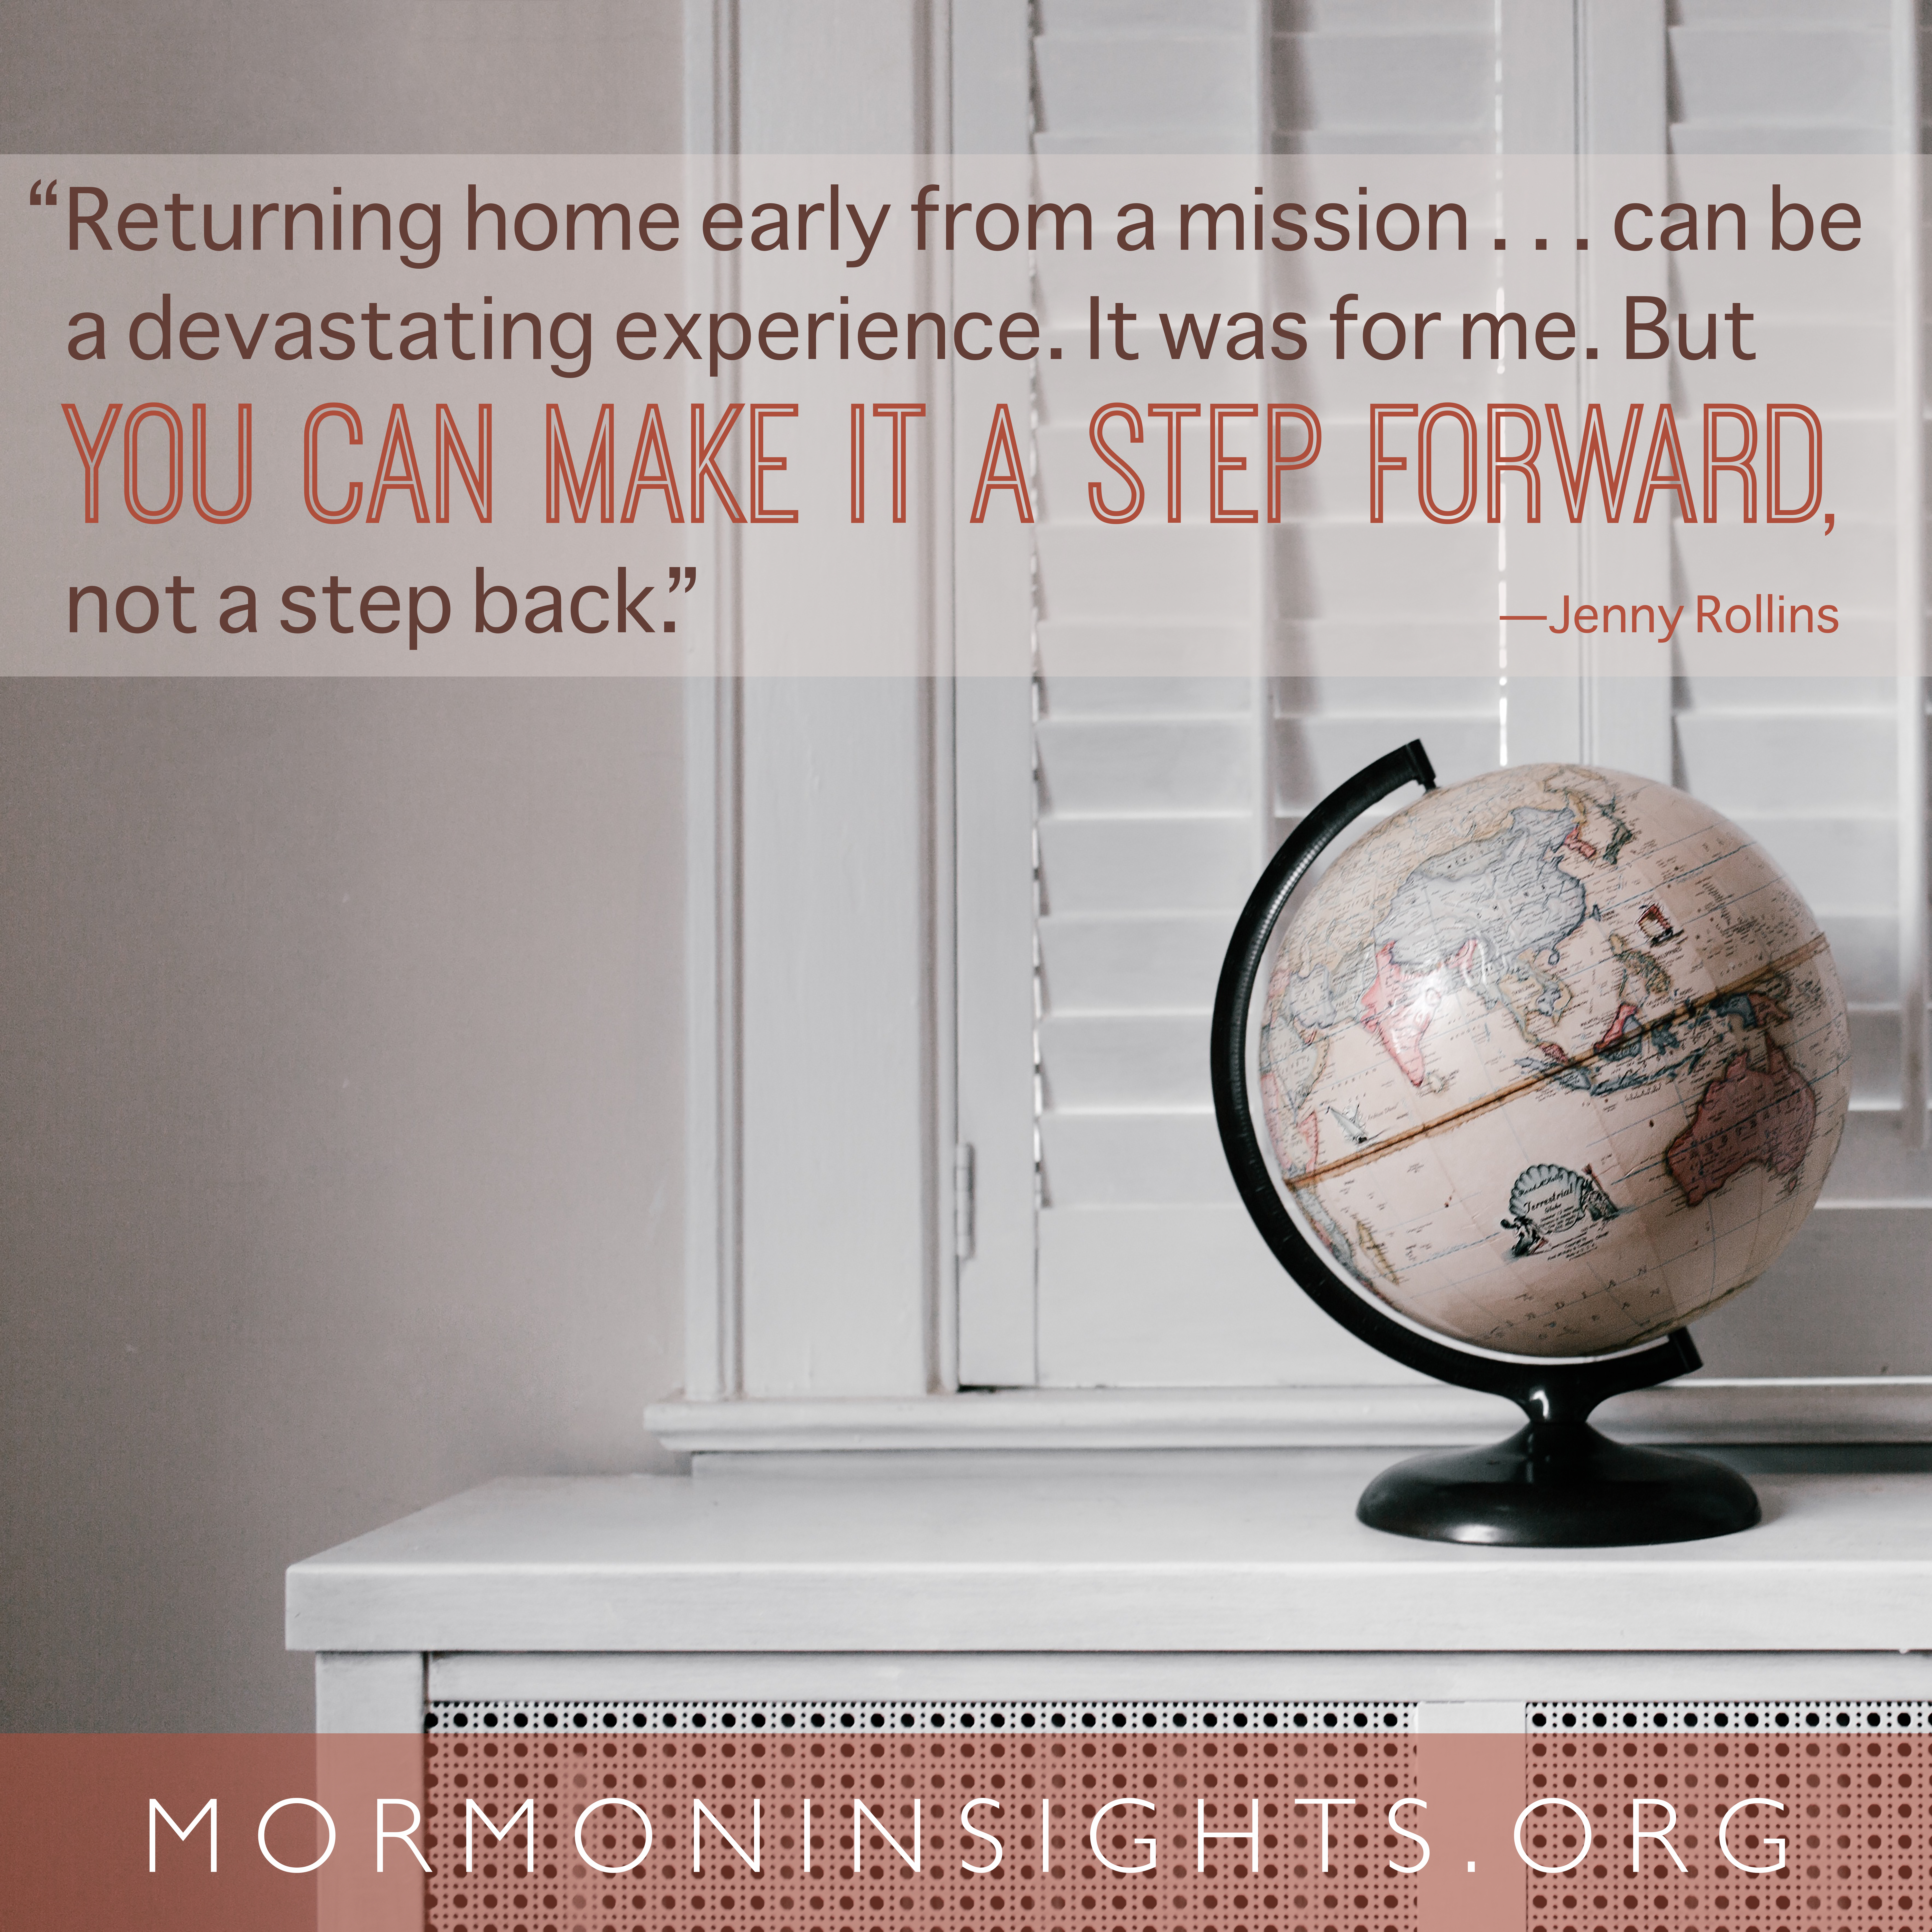 "Returning home early from a mission . . . can be a devastating experience. It was for me. But you can make it a step forward, not a step back." -Jenny Rollins